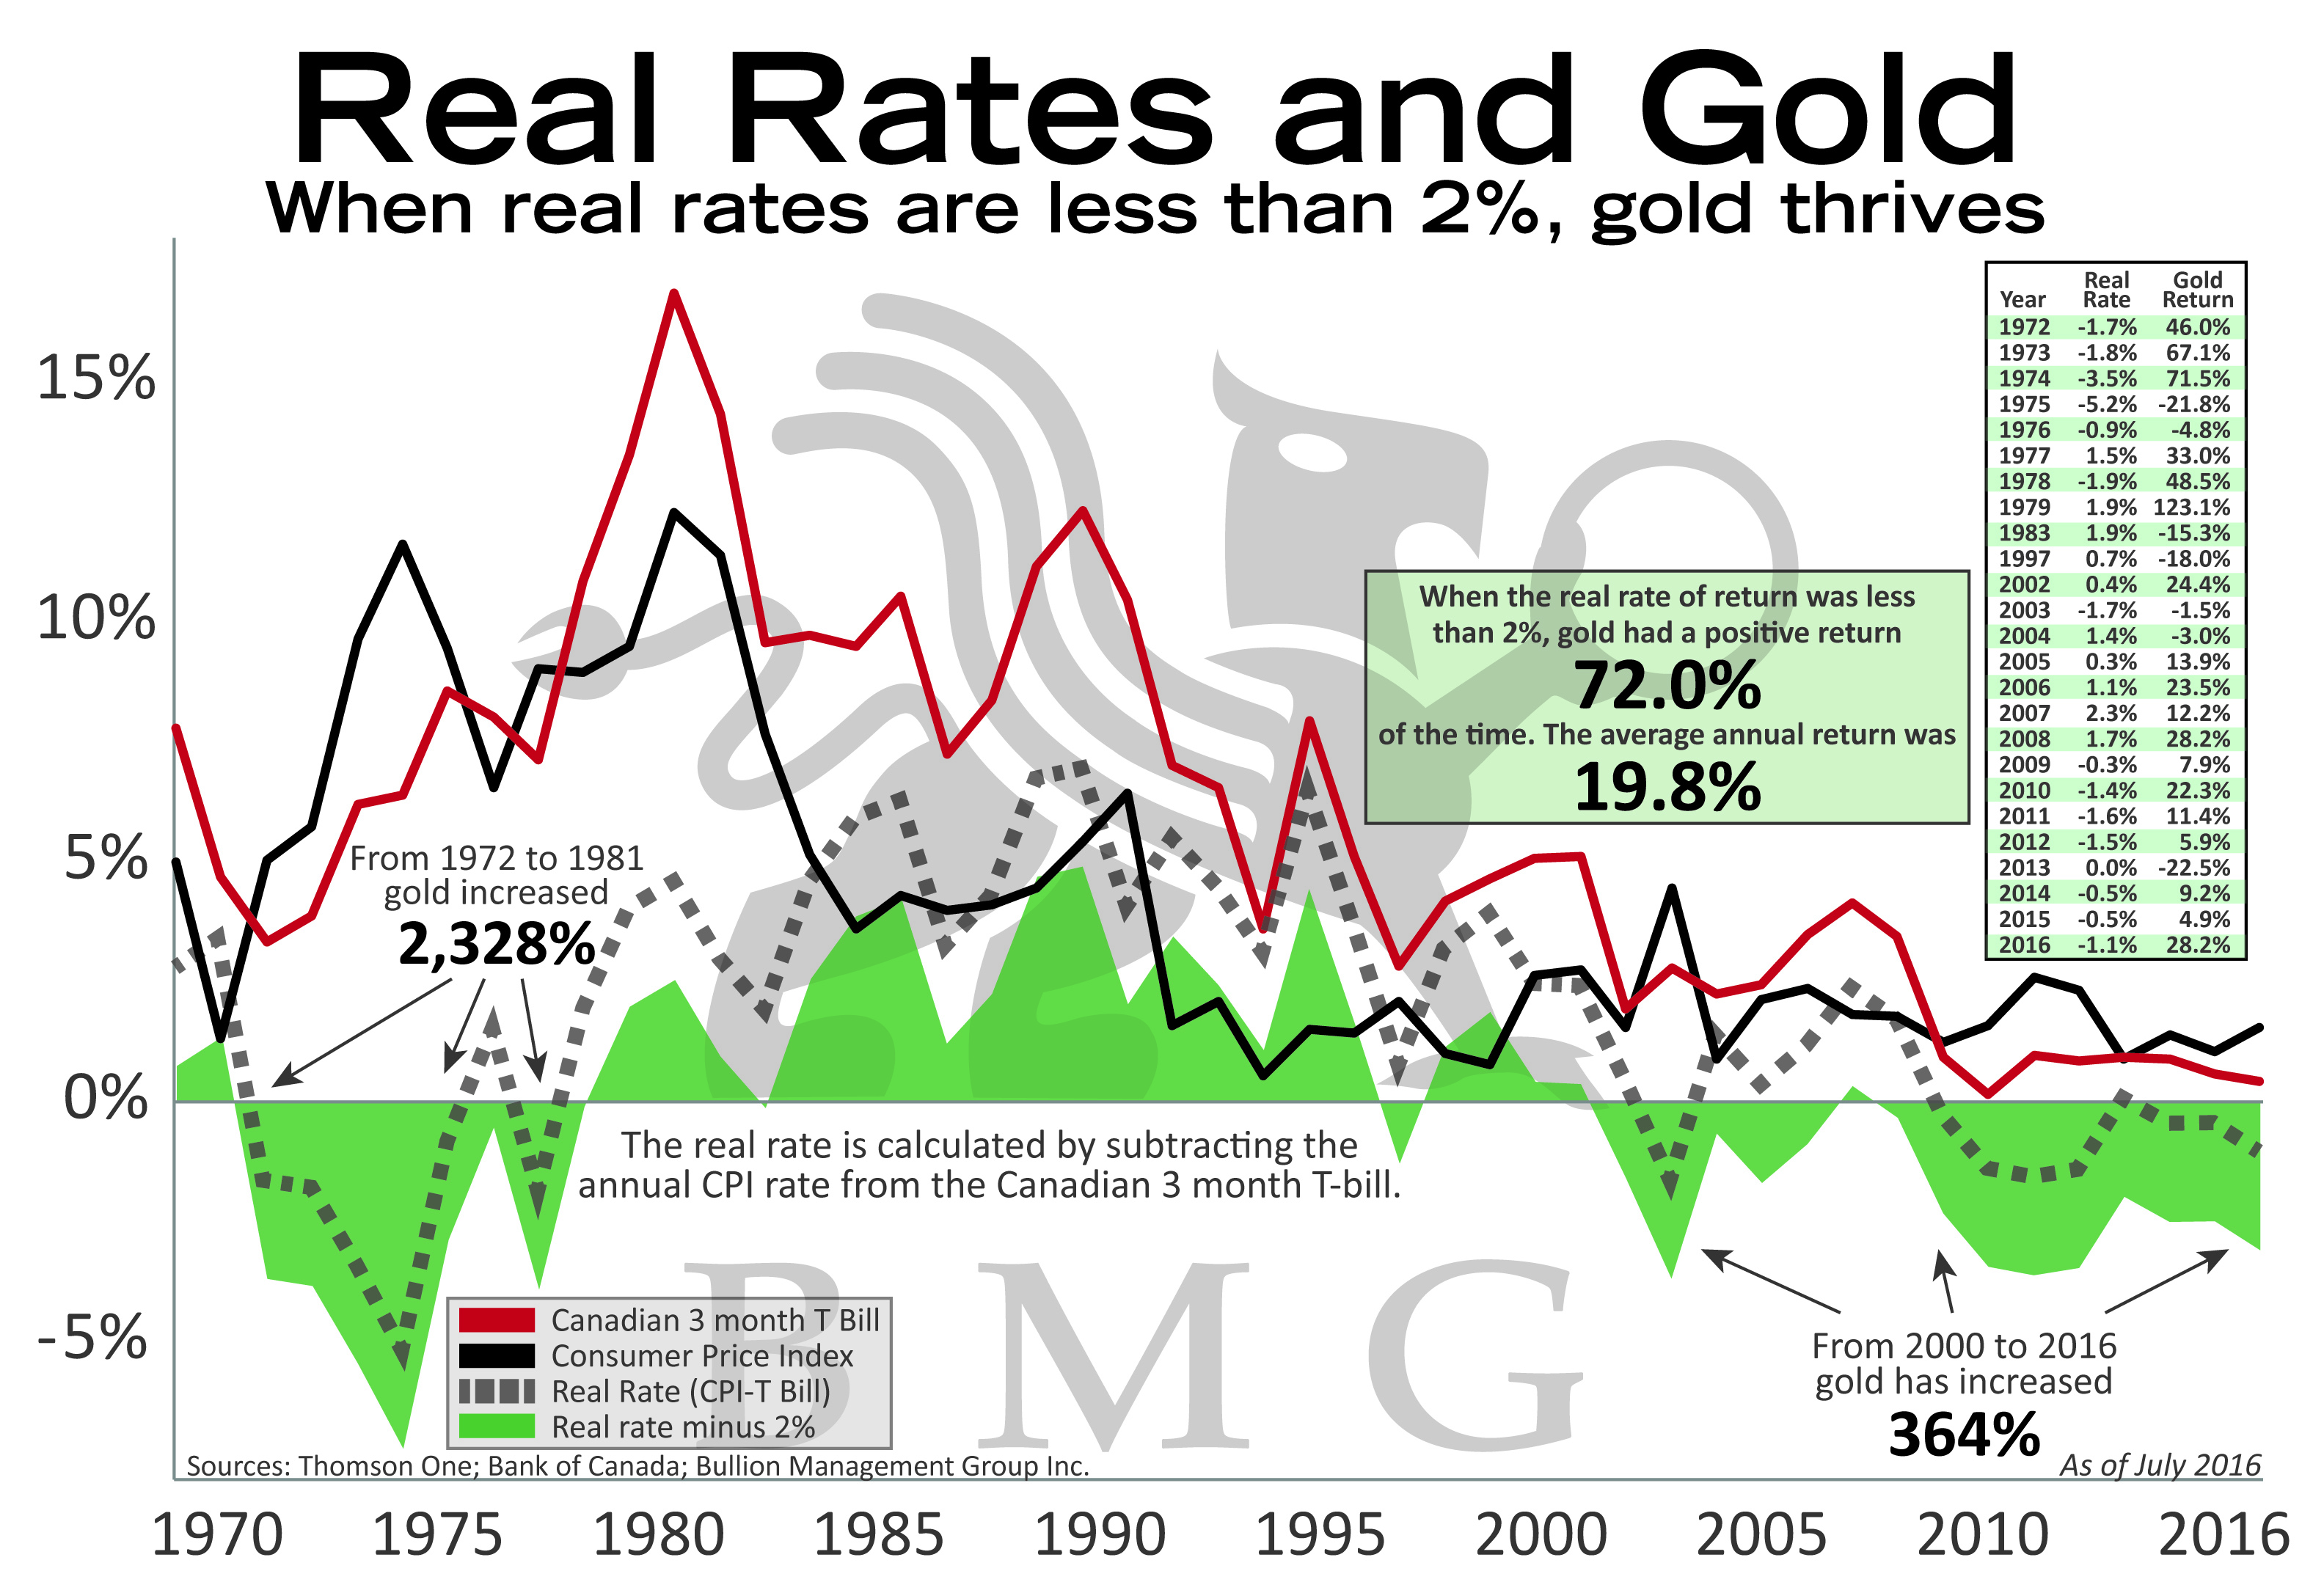 Real Rates and Gold BMG Bullion Management Group Inc.